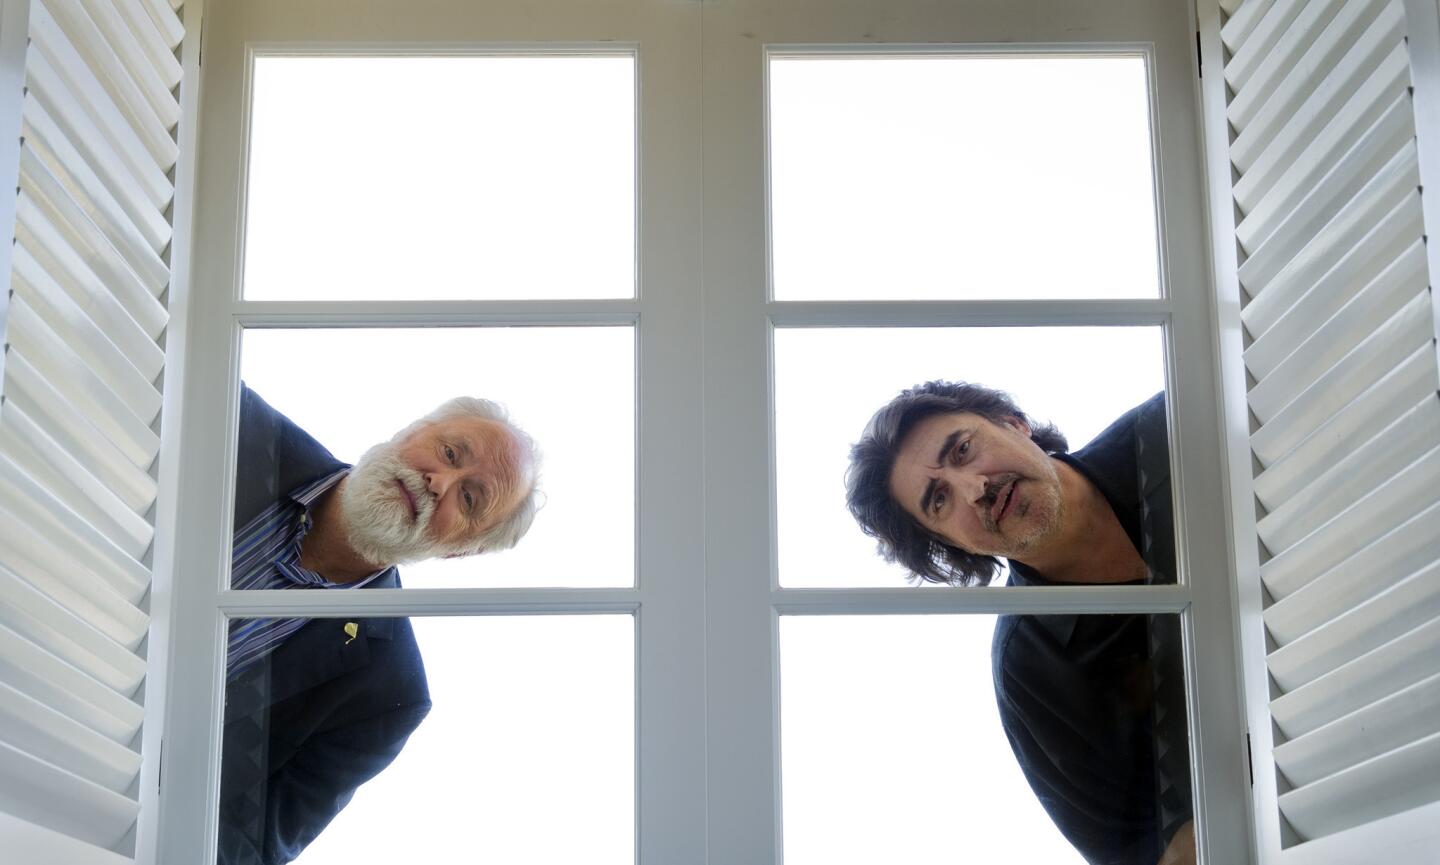 Celebrity portraits by The Times | John Lithgow and Alfred Molina